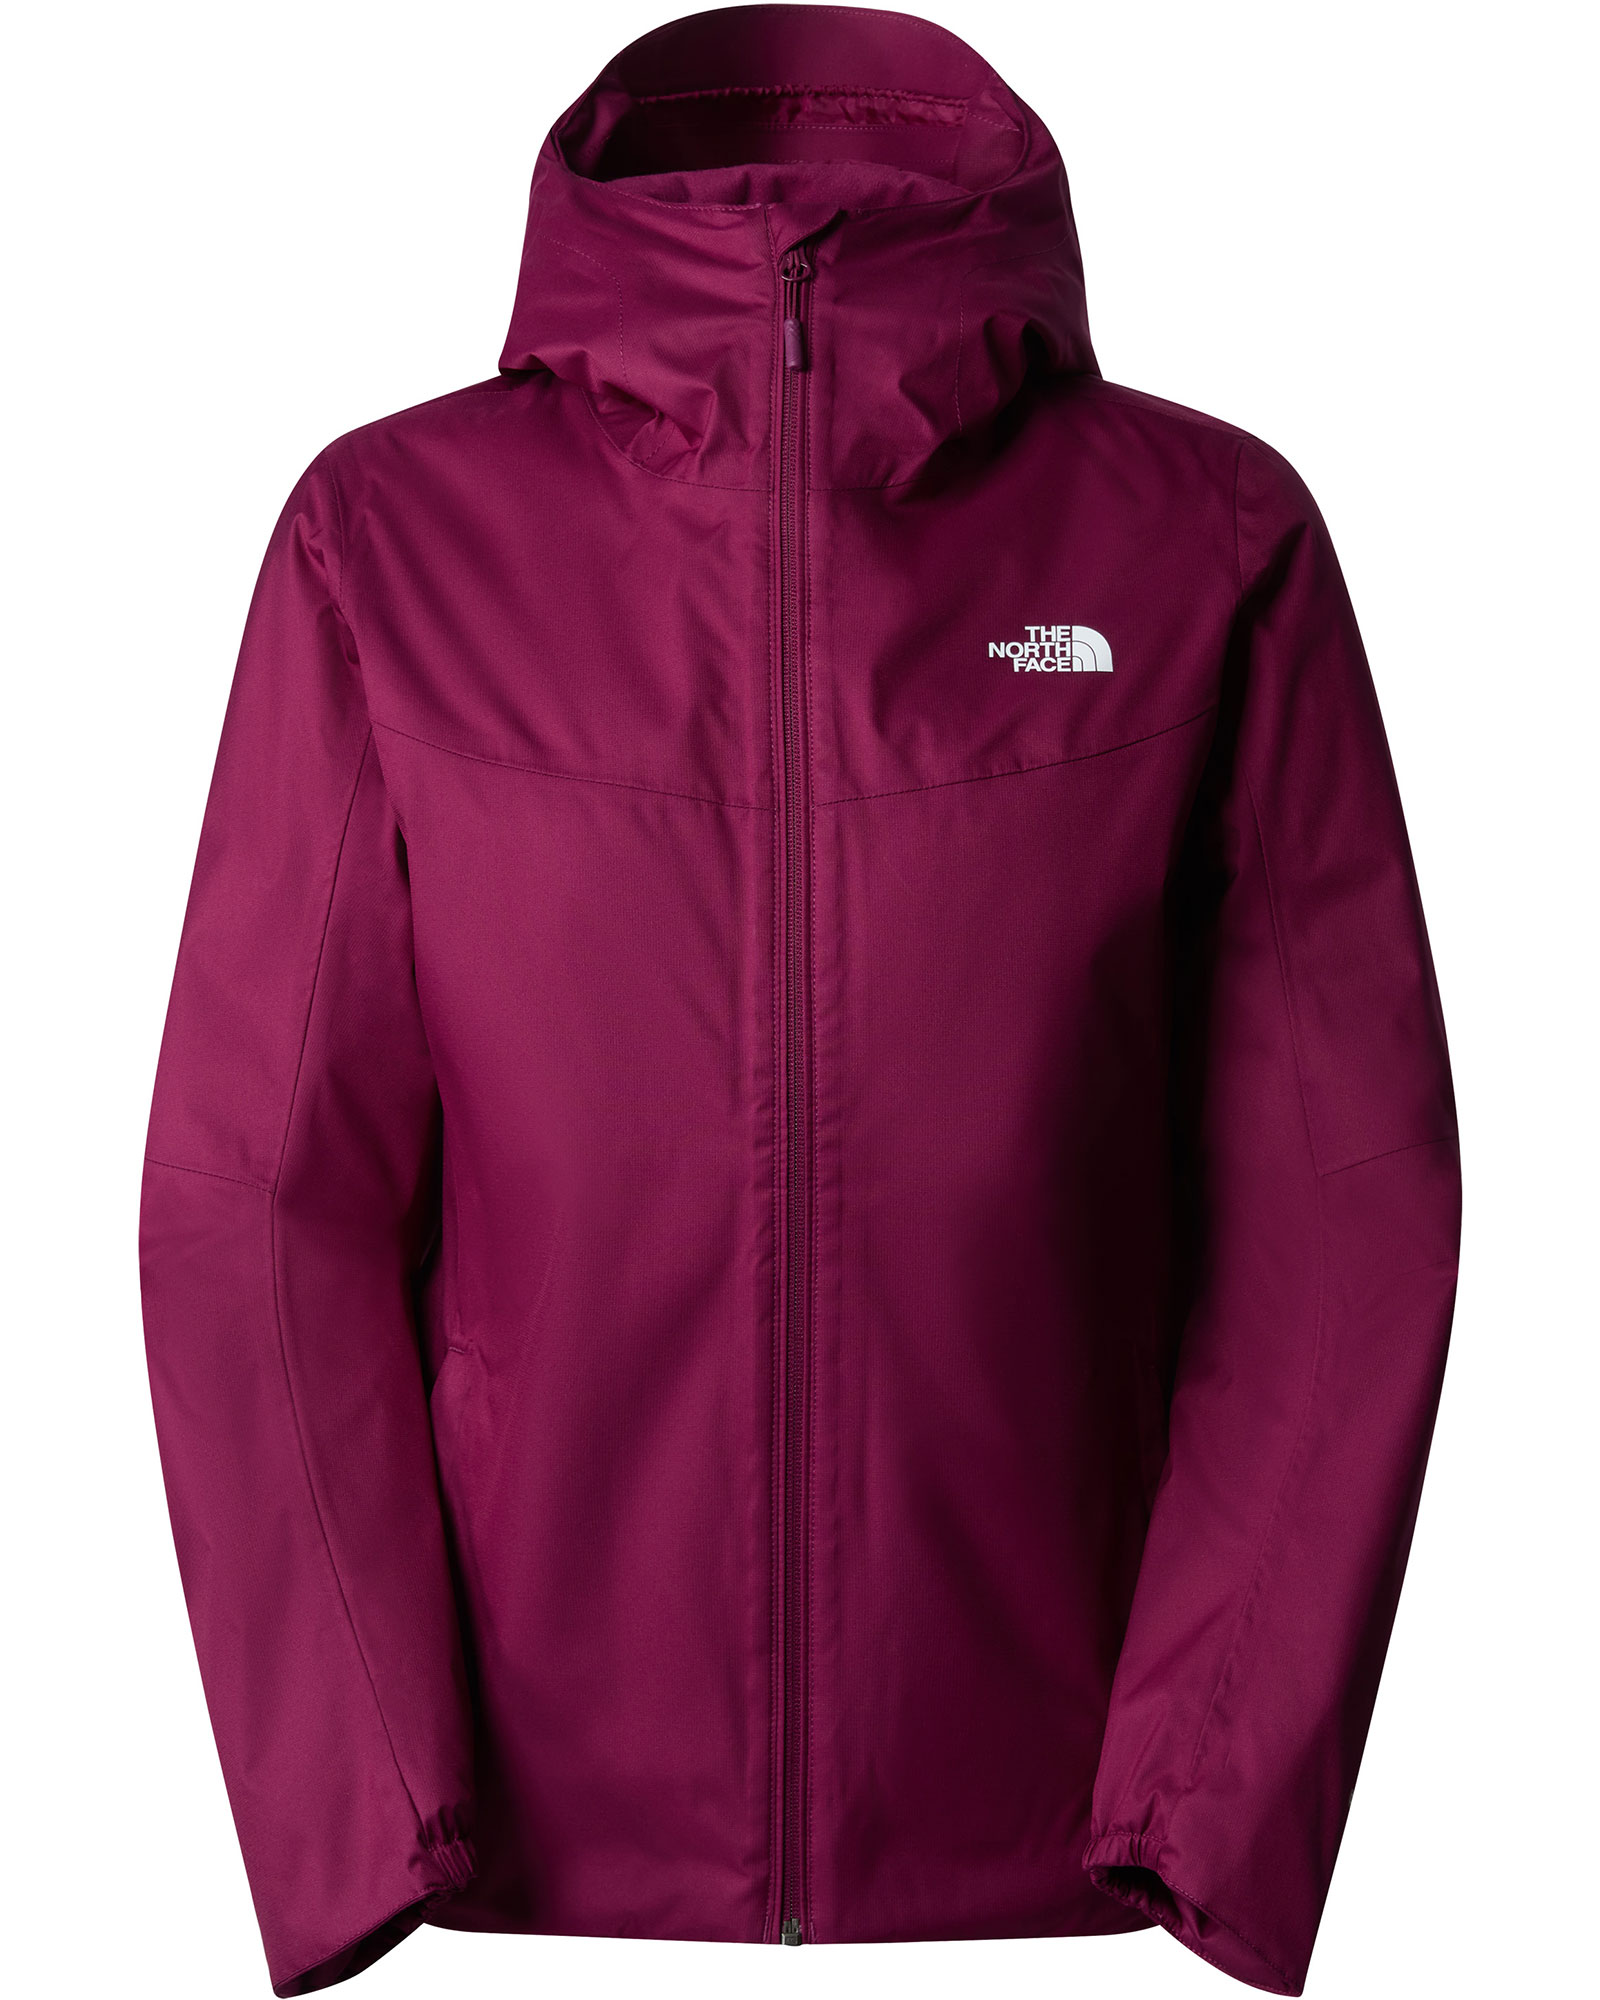 The North Face Quest DryVent Women’s Insulated Jacket - Boysenberry S